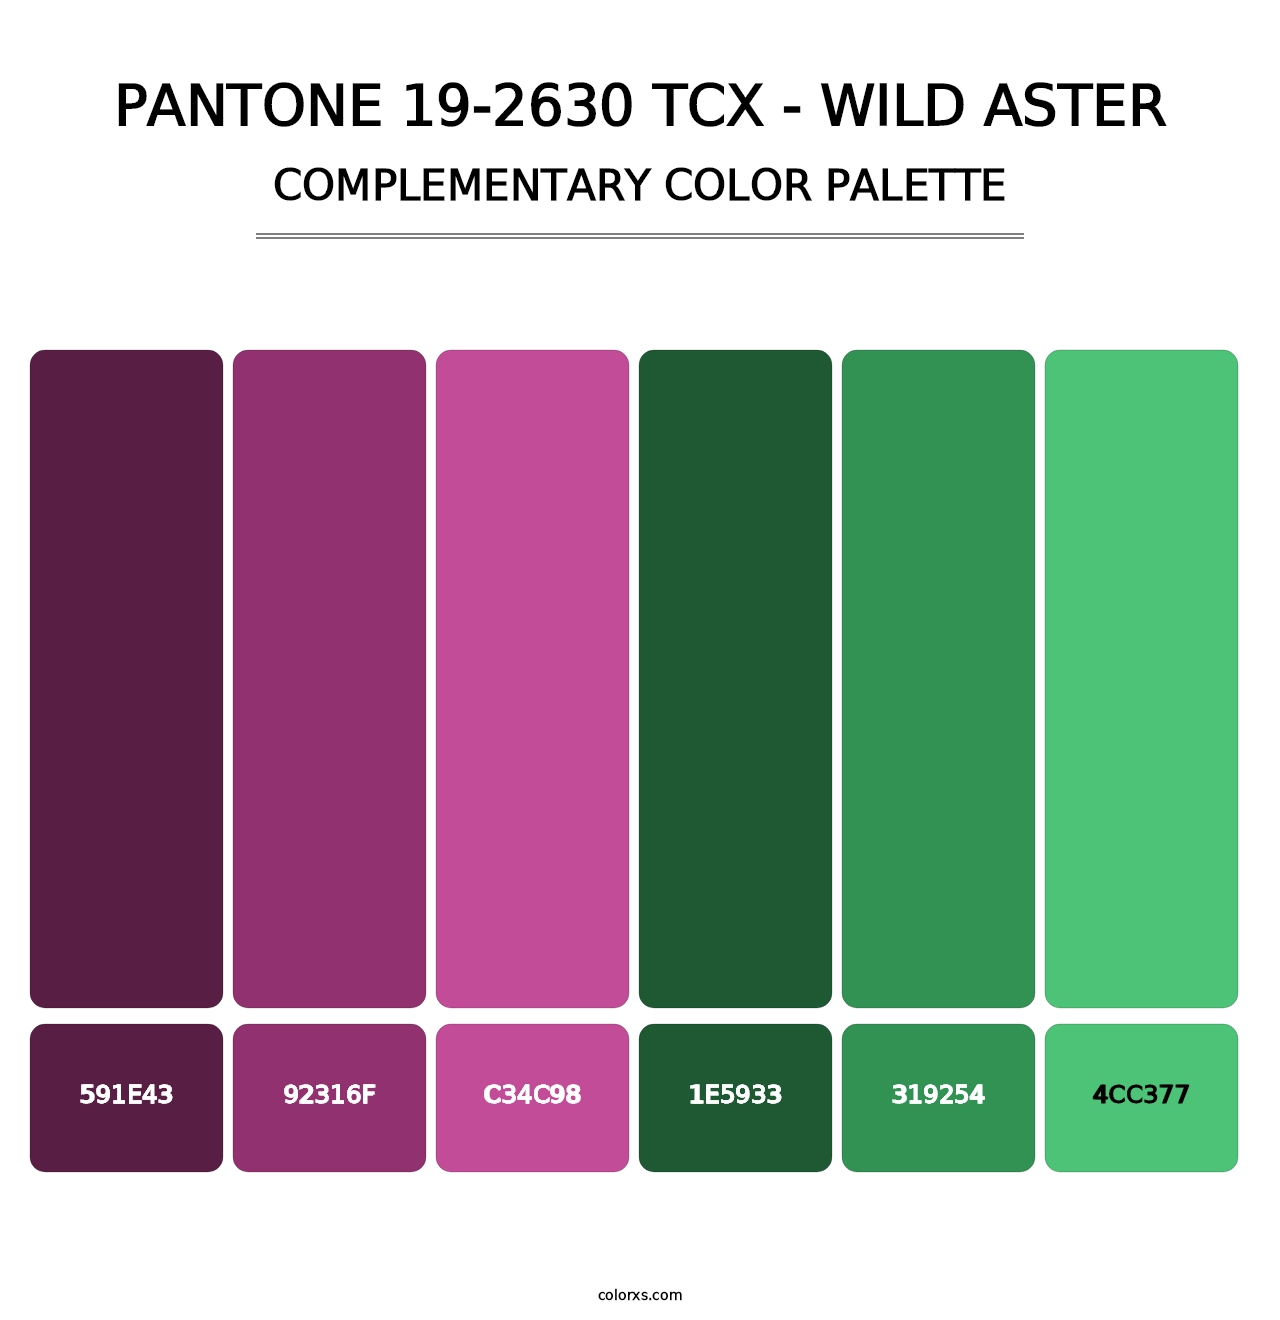 PANTONE 19-2630 TCX - Wild Aster - Complementary Color Palette